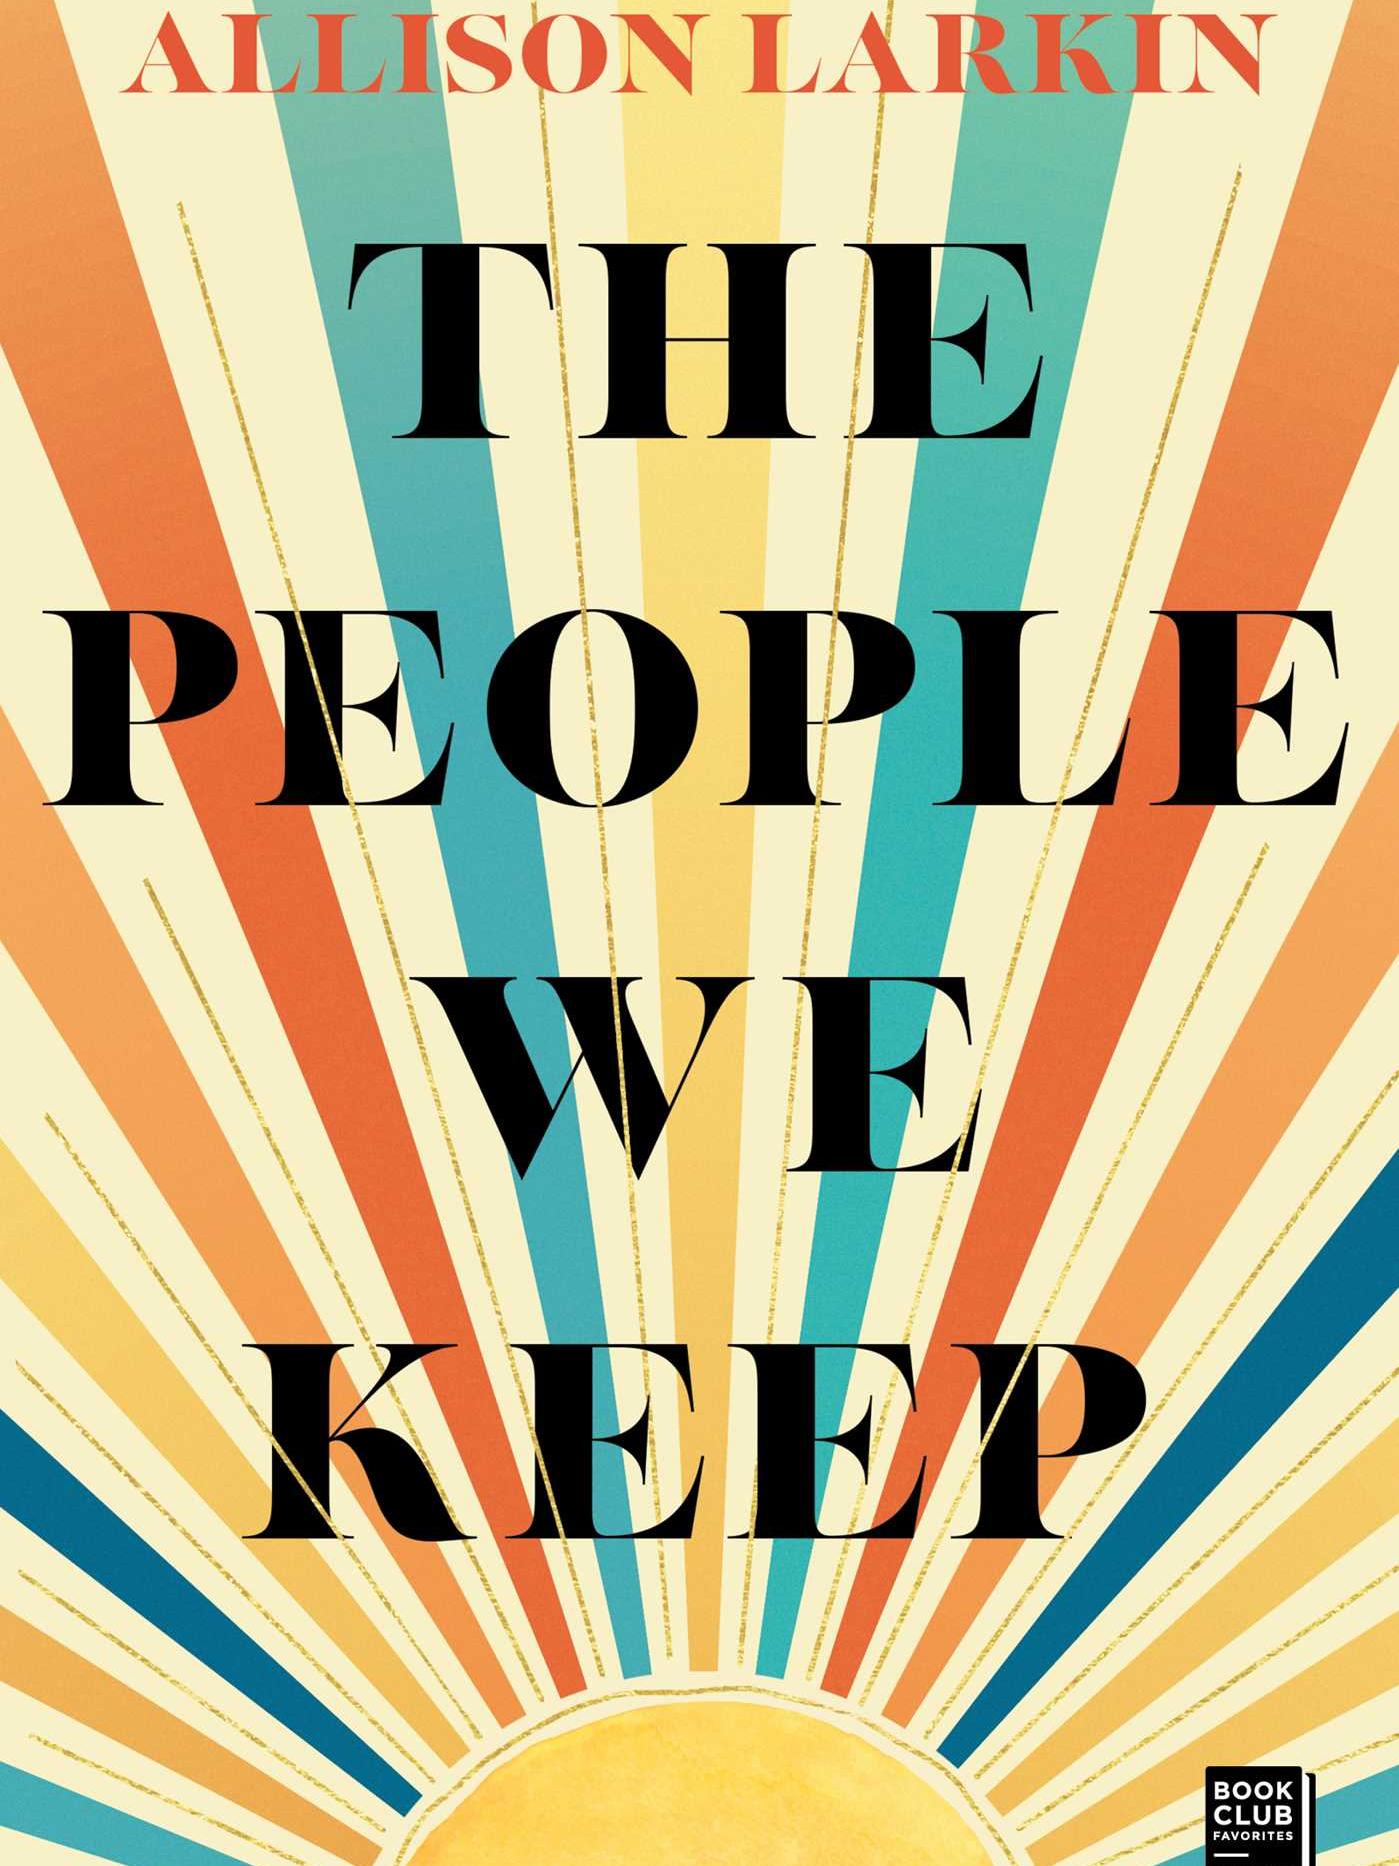 The People We Keep book cover